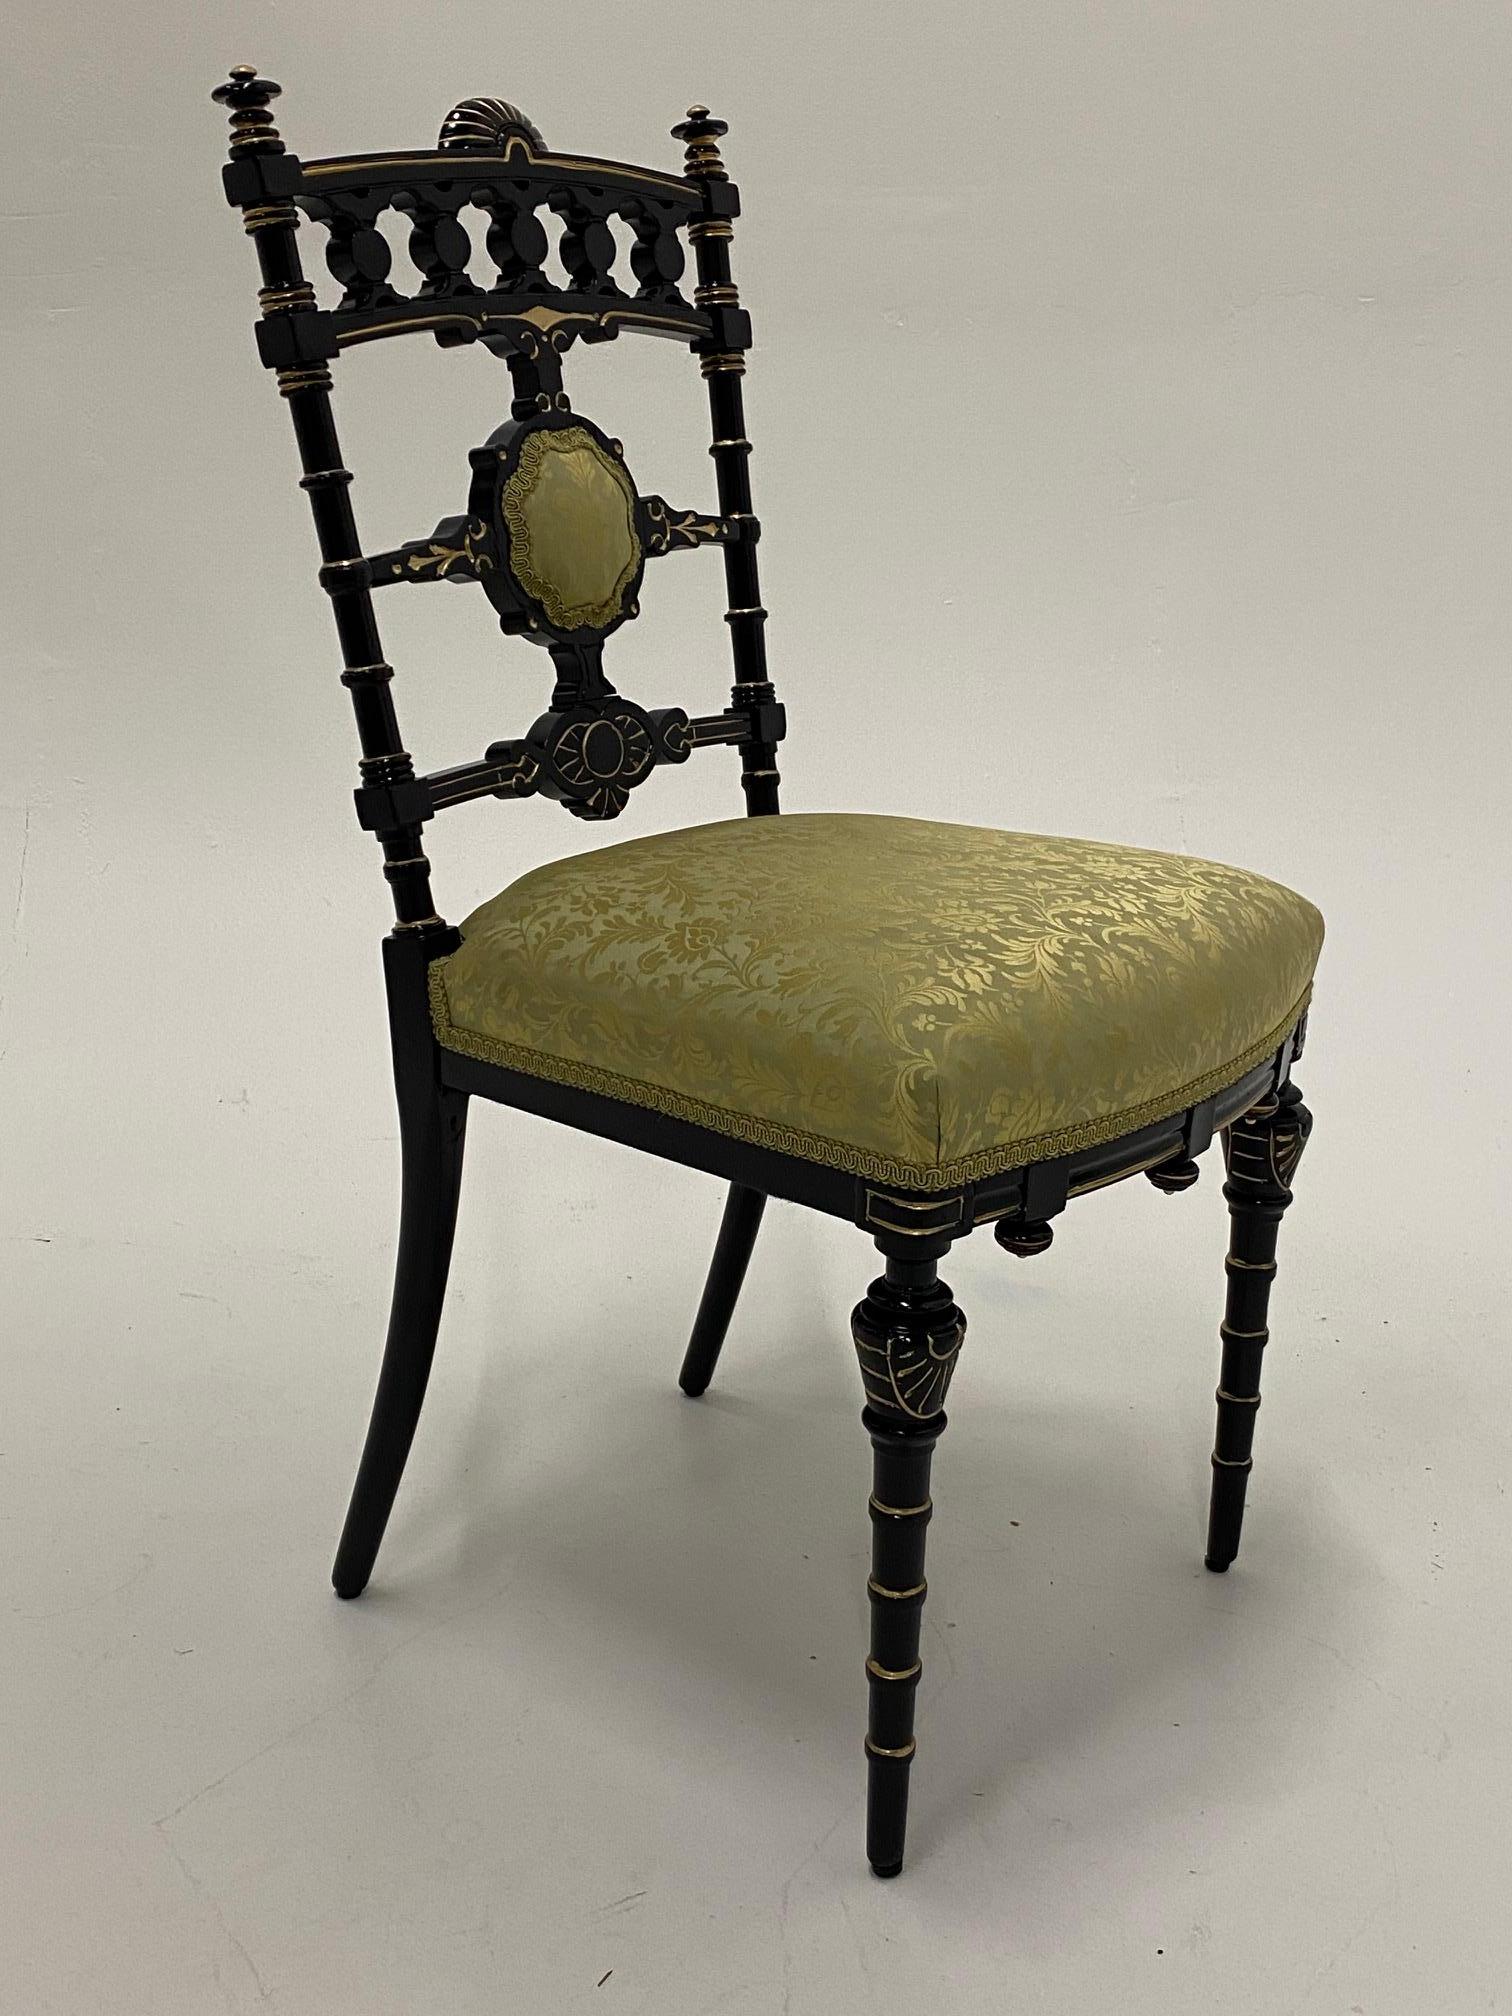 A strikingly decorative Victorian side chair having detailed carved ebonized wood and gilded frame offset with fancy chartreuse damask new upholstery.